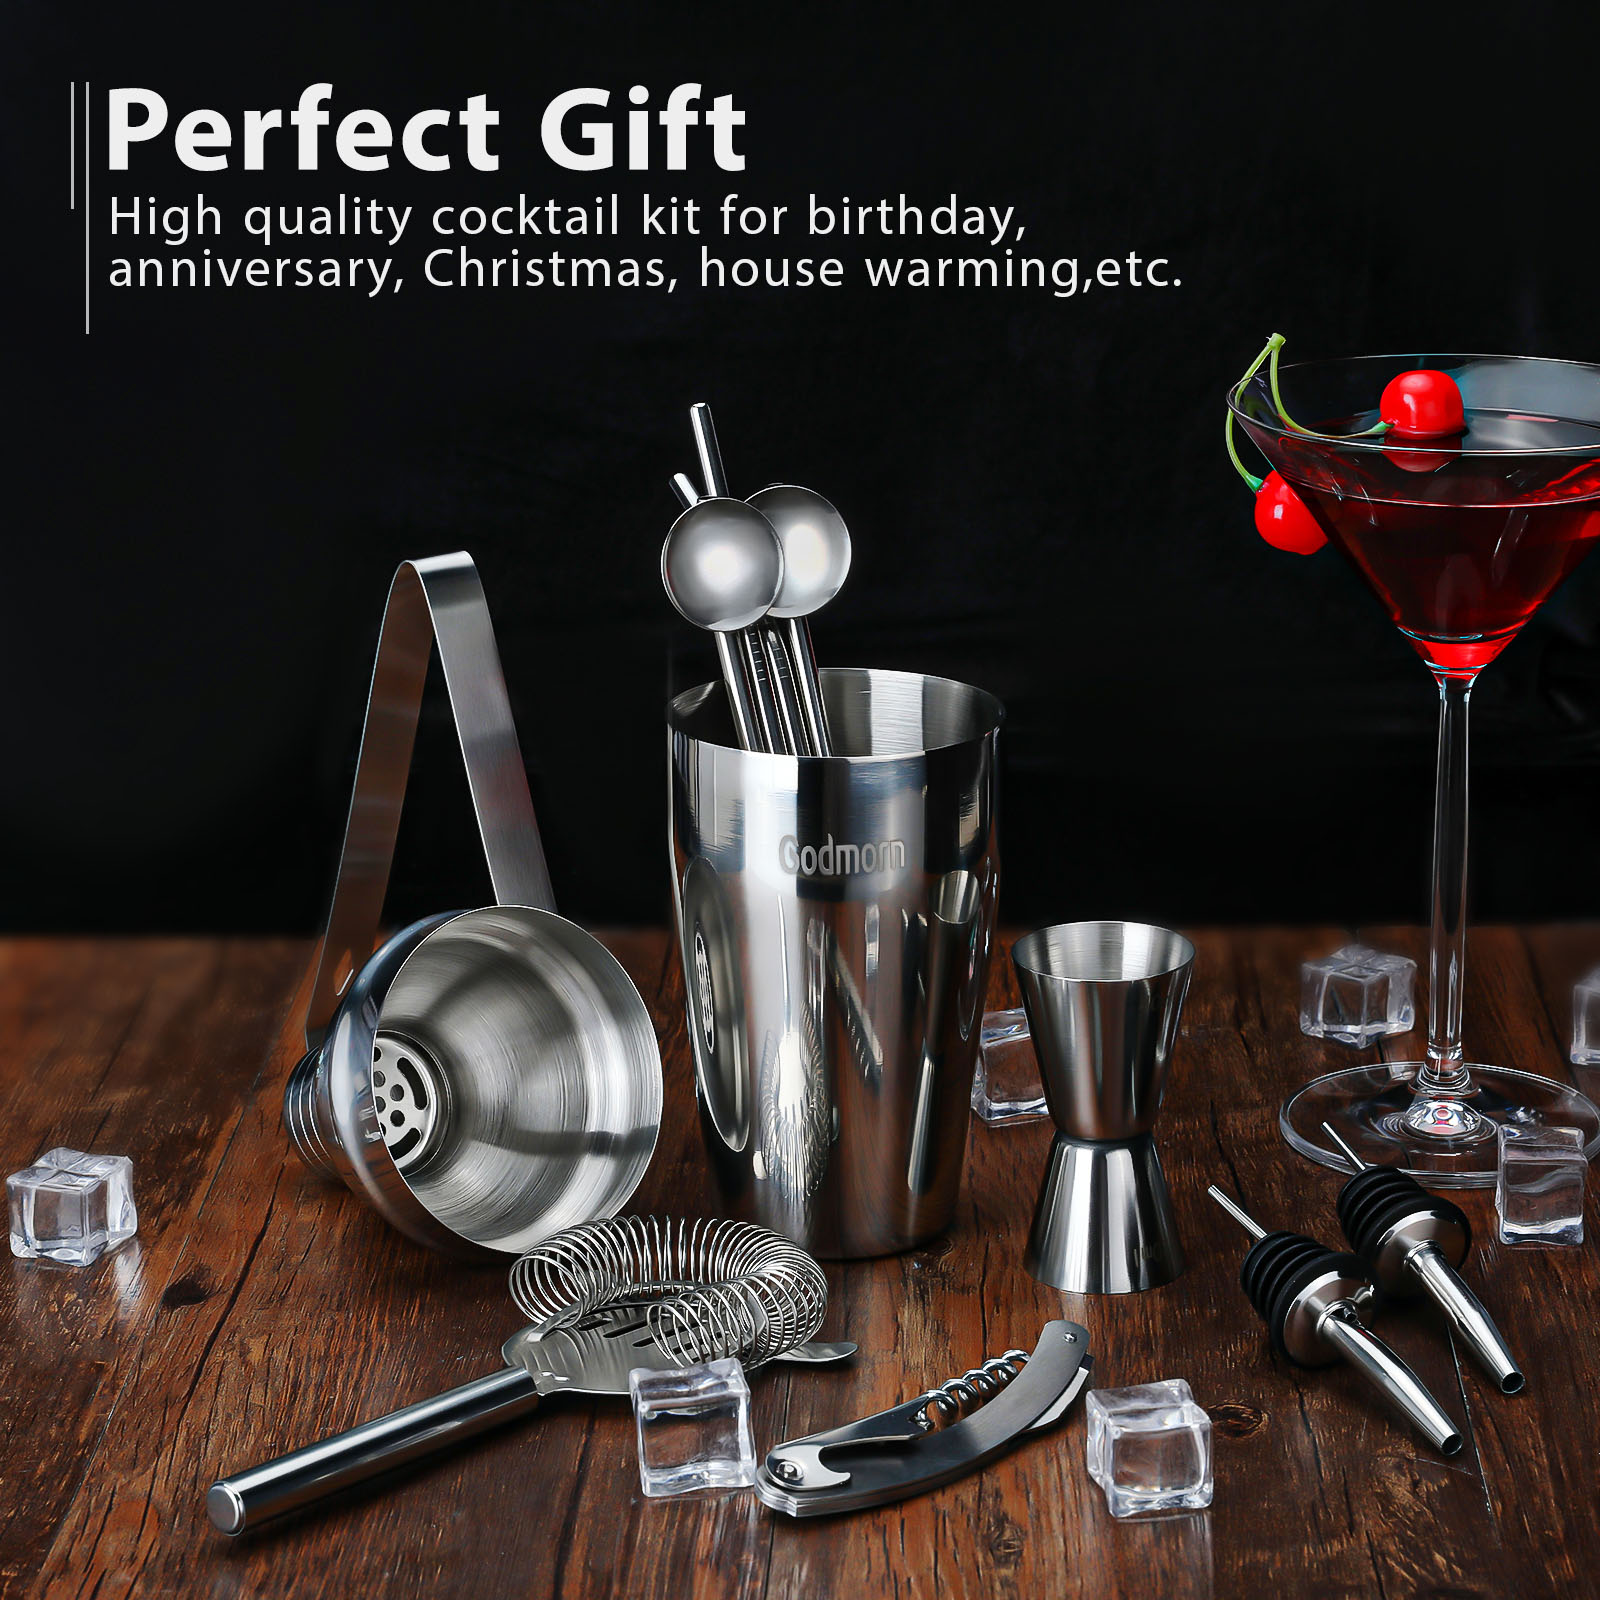 Cocktail-Set-Godmorn-Stainless-Steel-Cocktail-Shaker-Set-14-Piece-with-Better-Bamboo-Stand-1304971-9